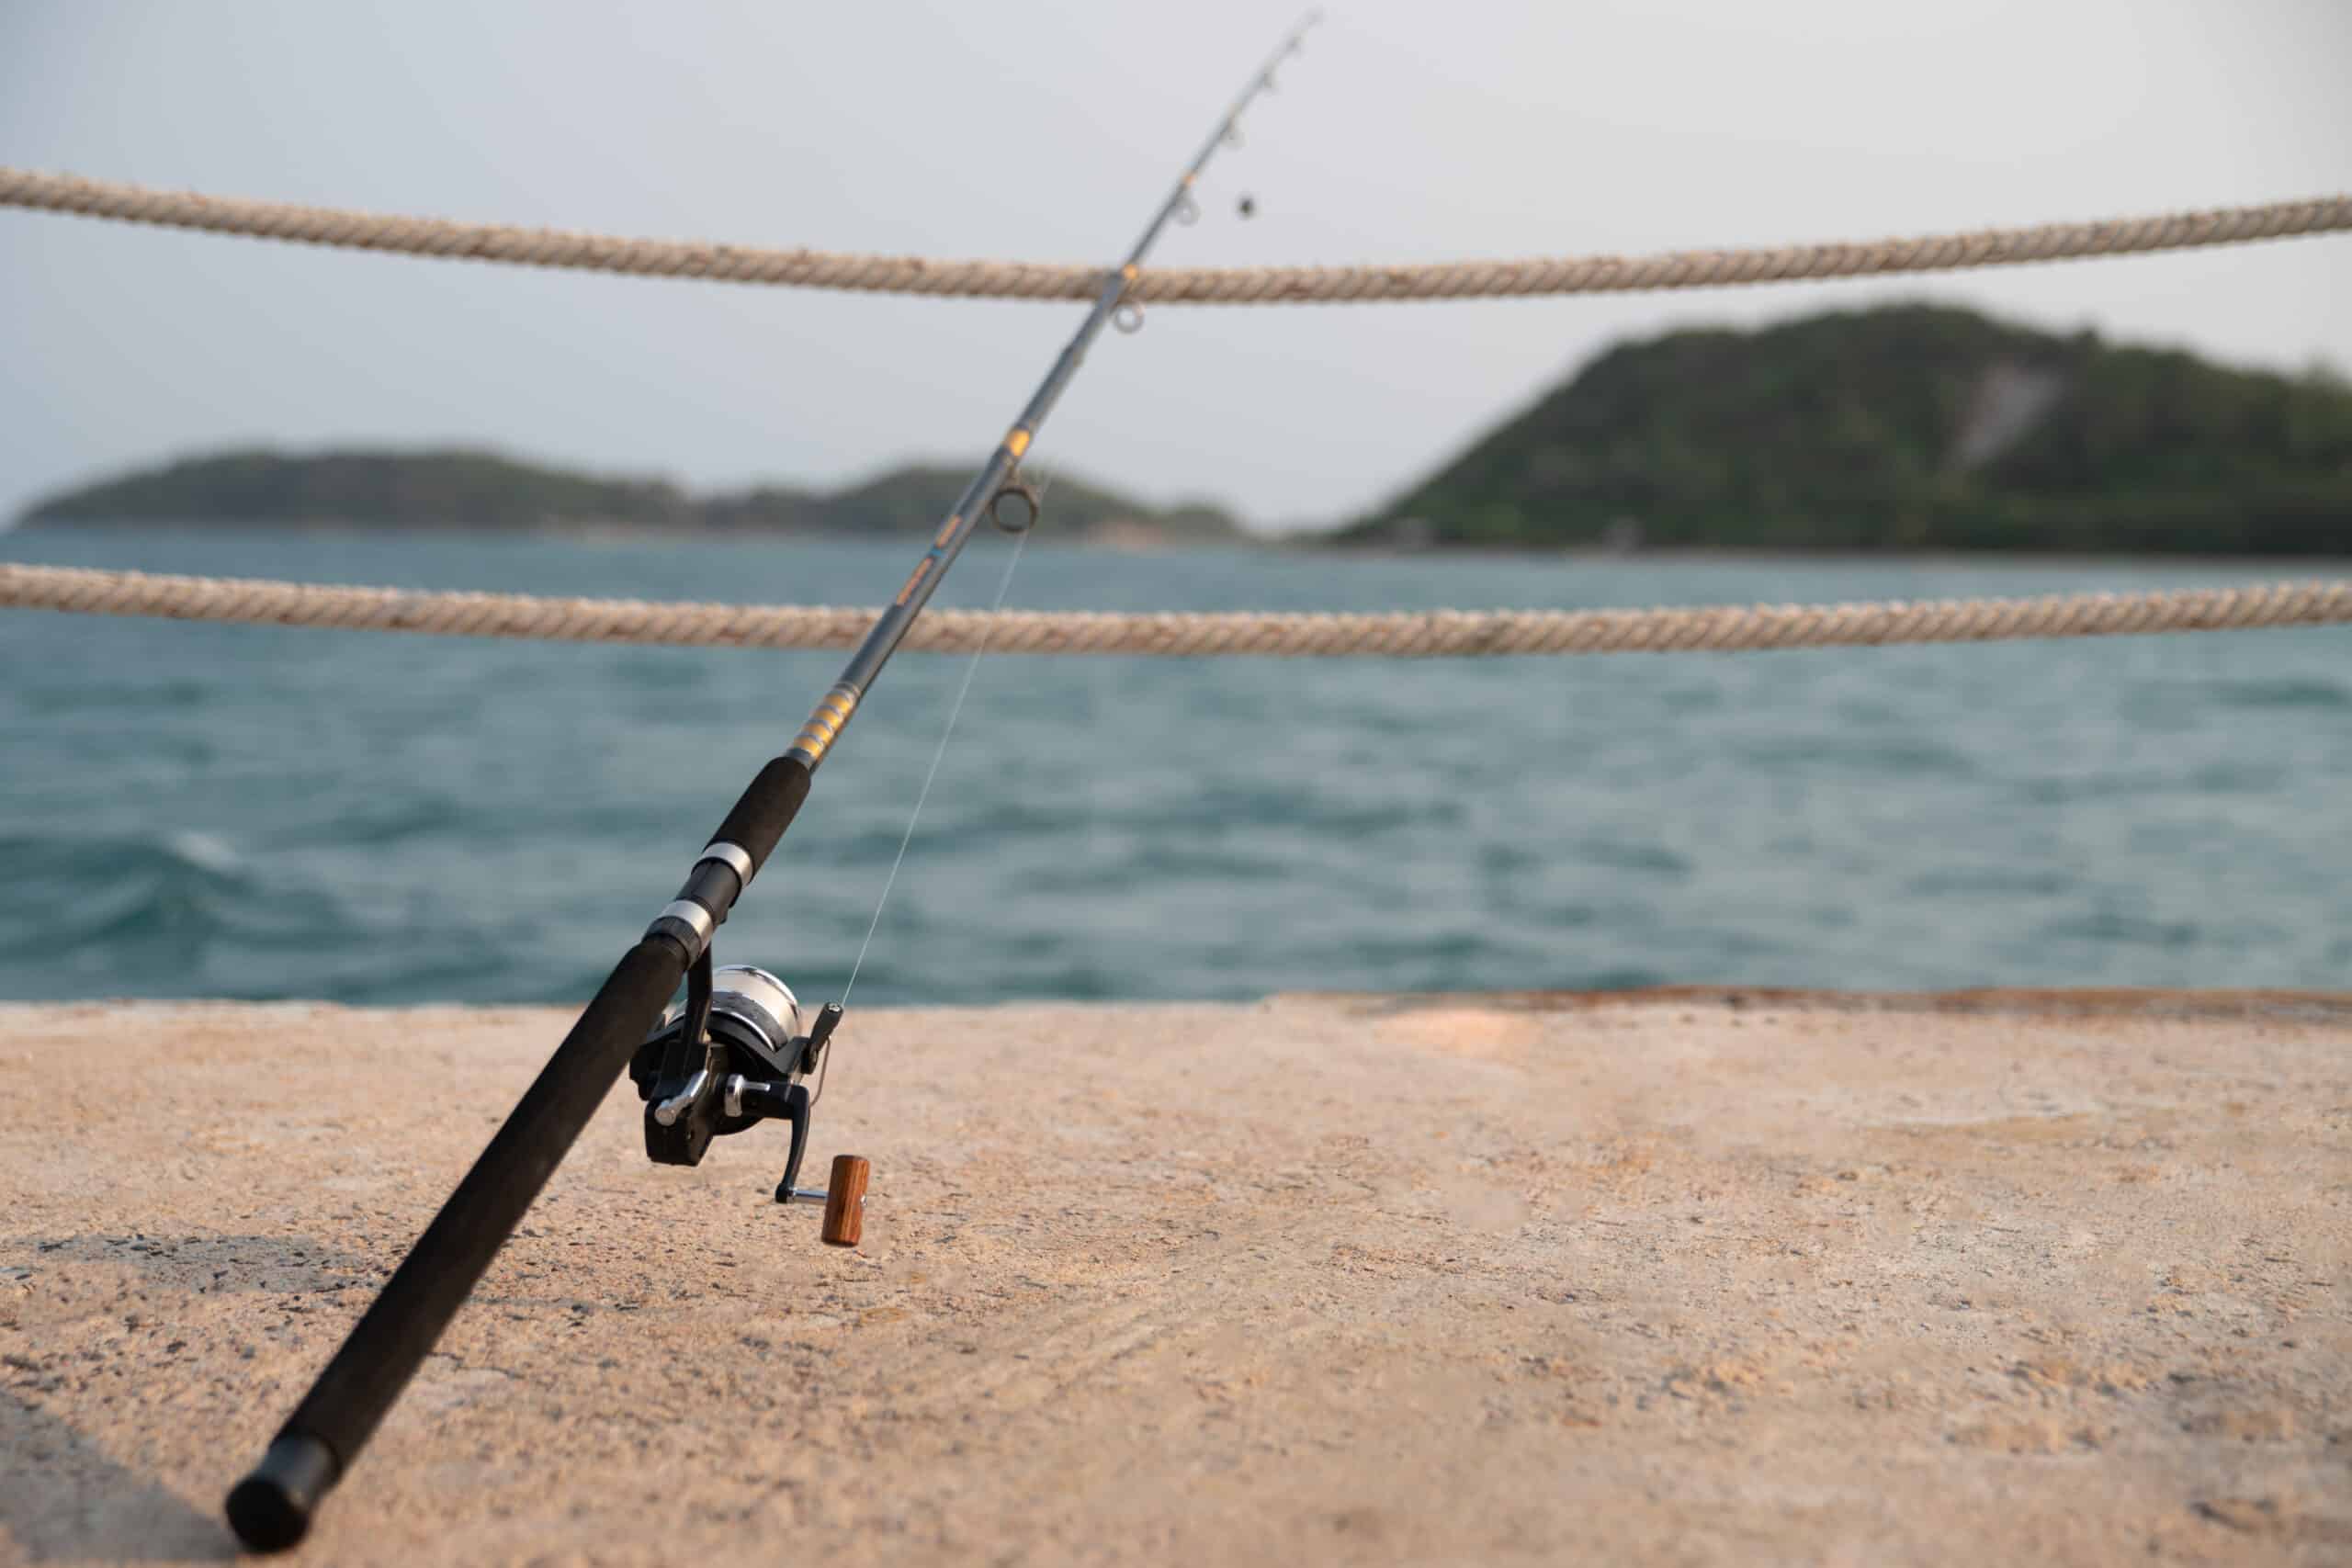 fanatic4fishing.com : What size rod and reel for pier fishing?